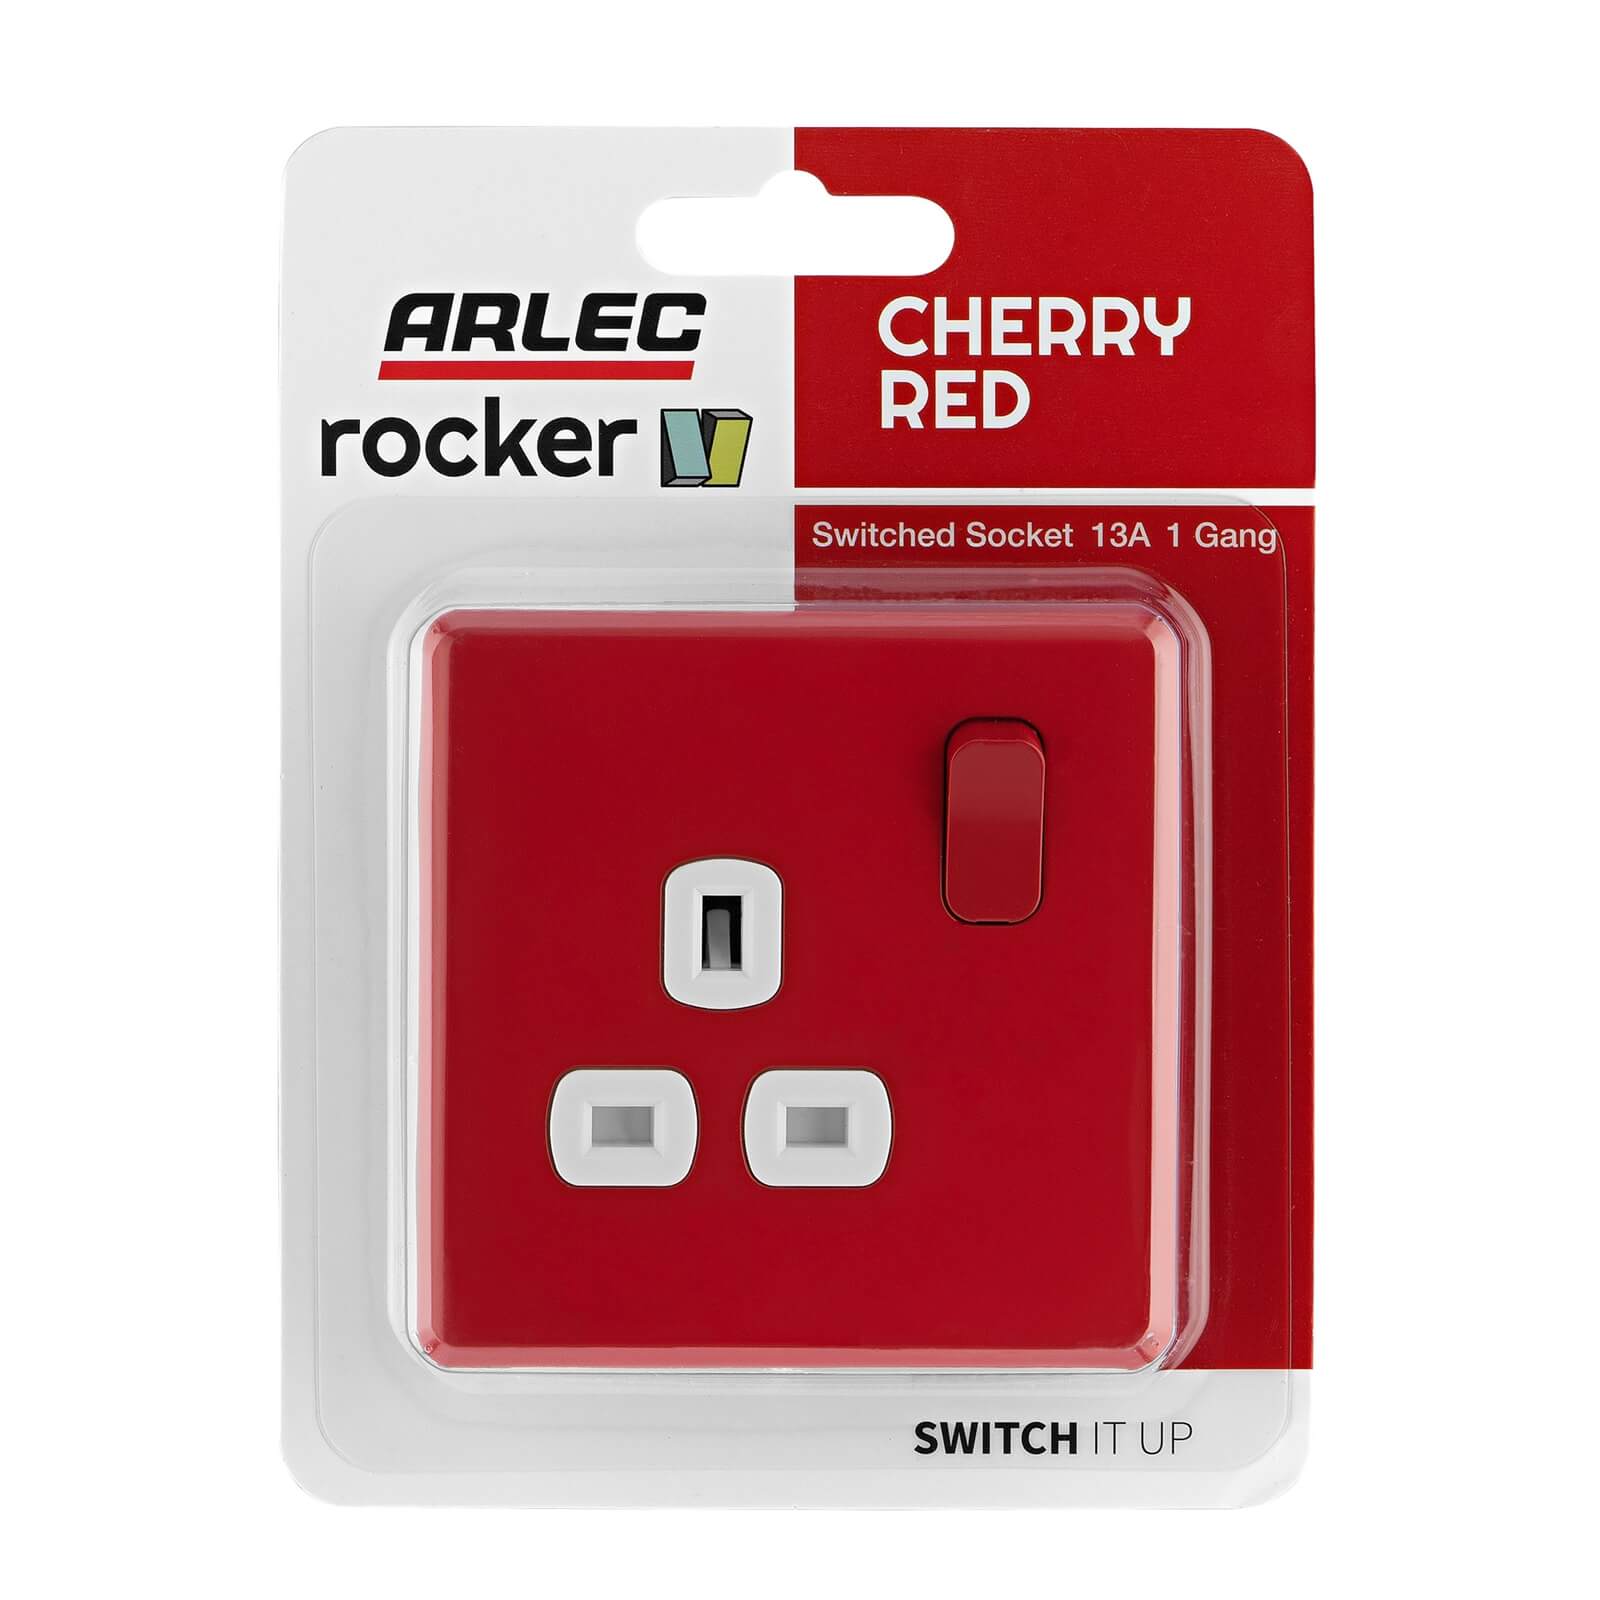 Arlec Rocker  13A 1 Gang Cherry Red Single switched socket